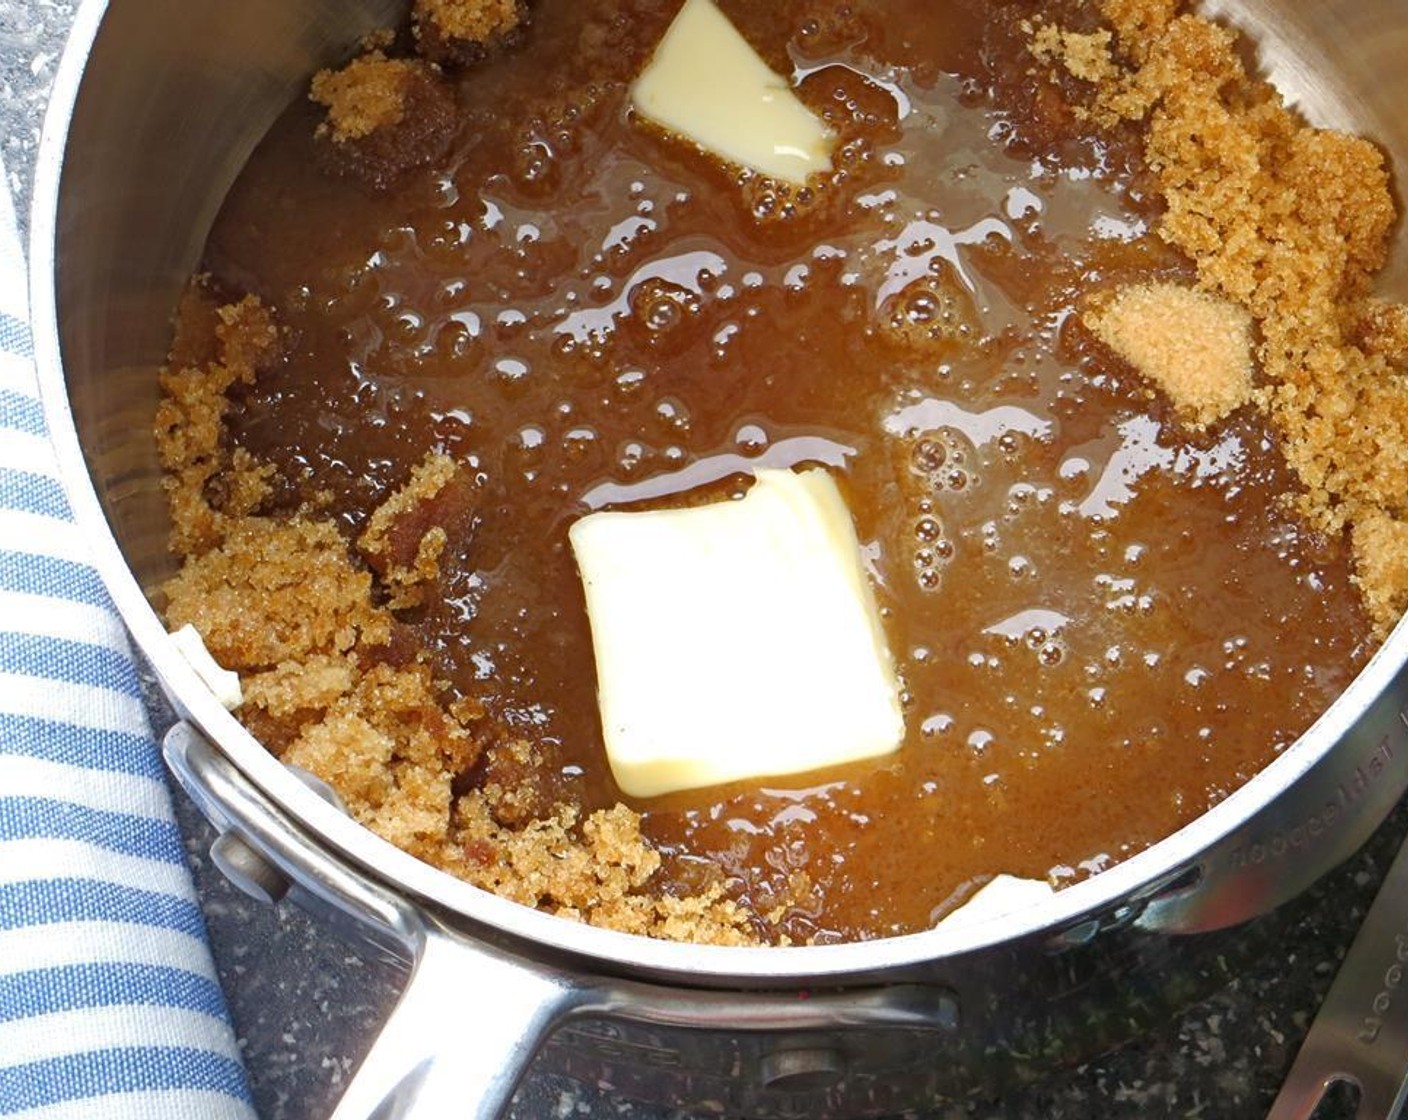 step 1 Place Brown Sugar (1 cup), Milk (2 Tbsp), Unsalted Butter (1 1/2 Tbsp), and Vanilla Extract (1 tsp) in a heavy saucepan over medium heat. Cook until the sugar is dissolved and butter is melted. Bring mixture to a boil, stirring constantly.